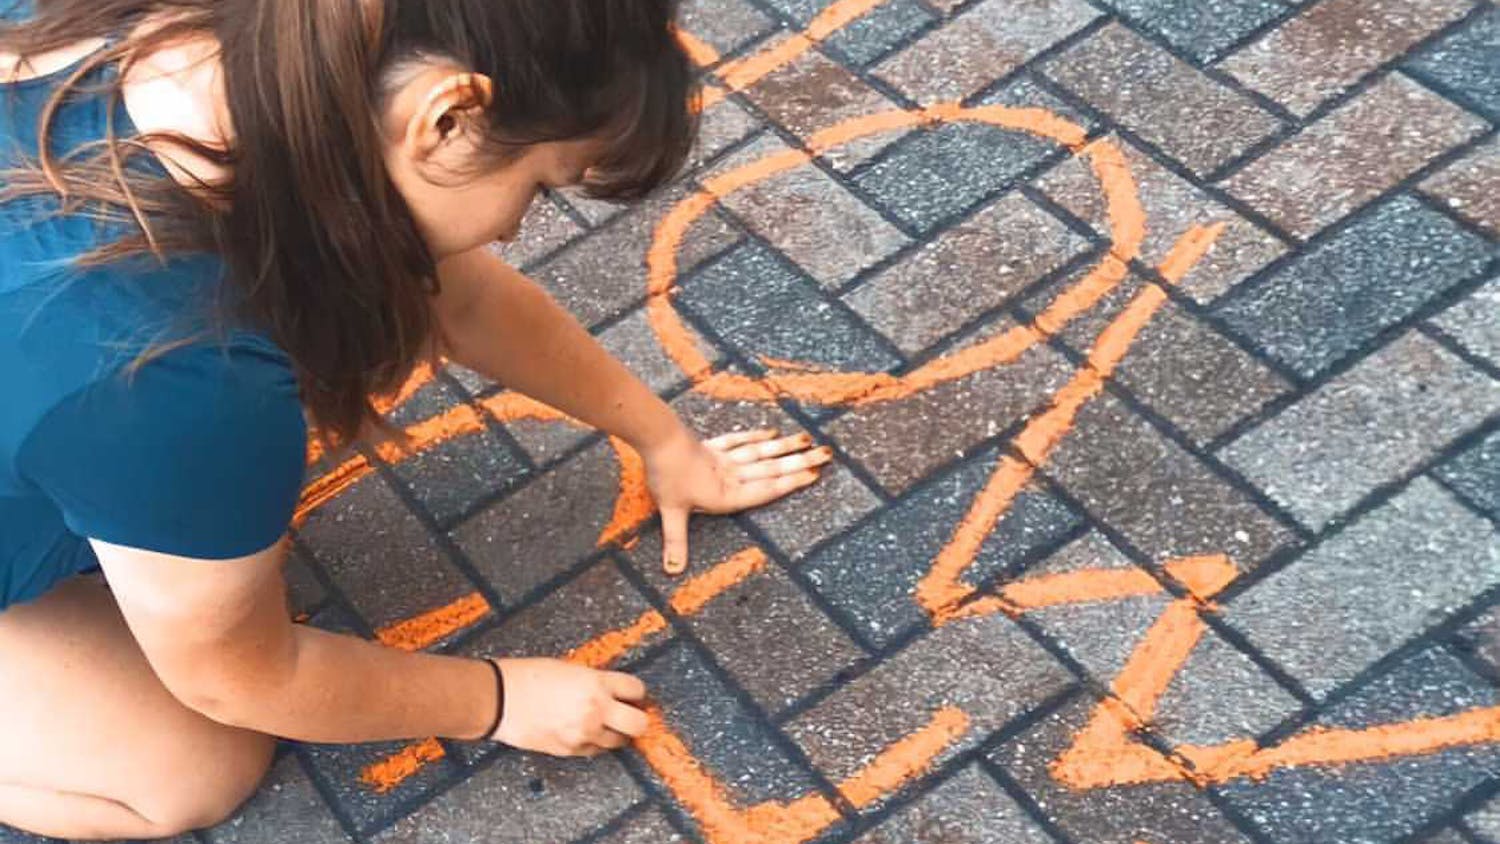 The organization chalks messages on the sidewalks of Gainesville to raise awareness about street harassment. 